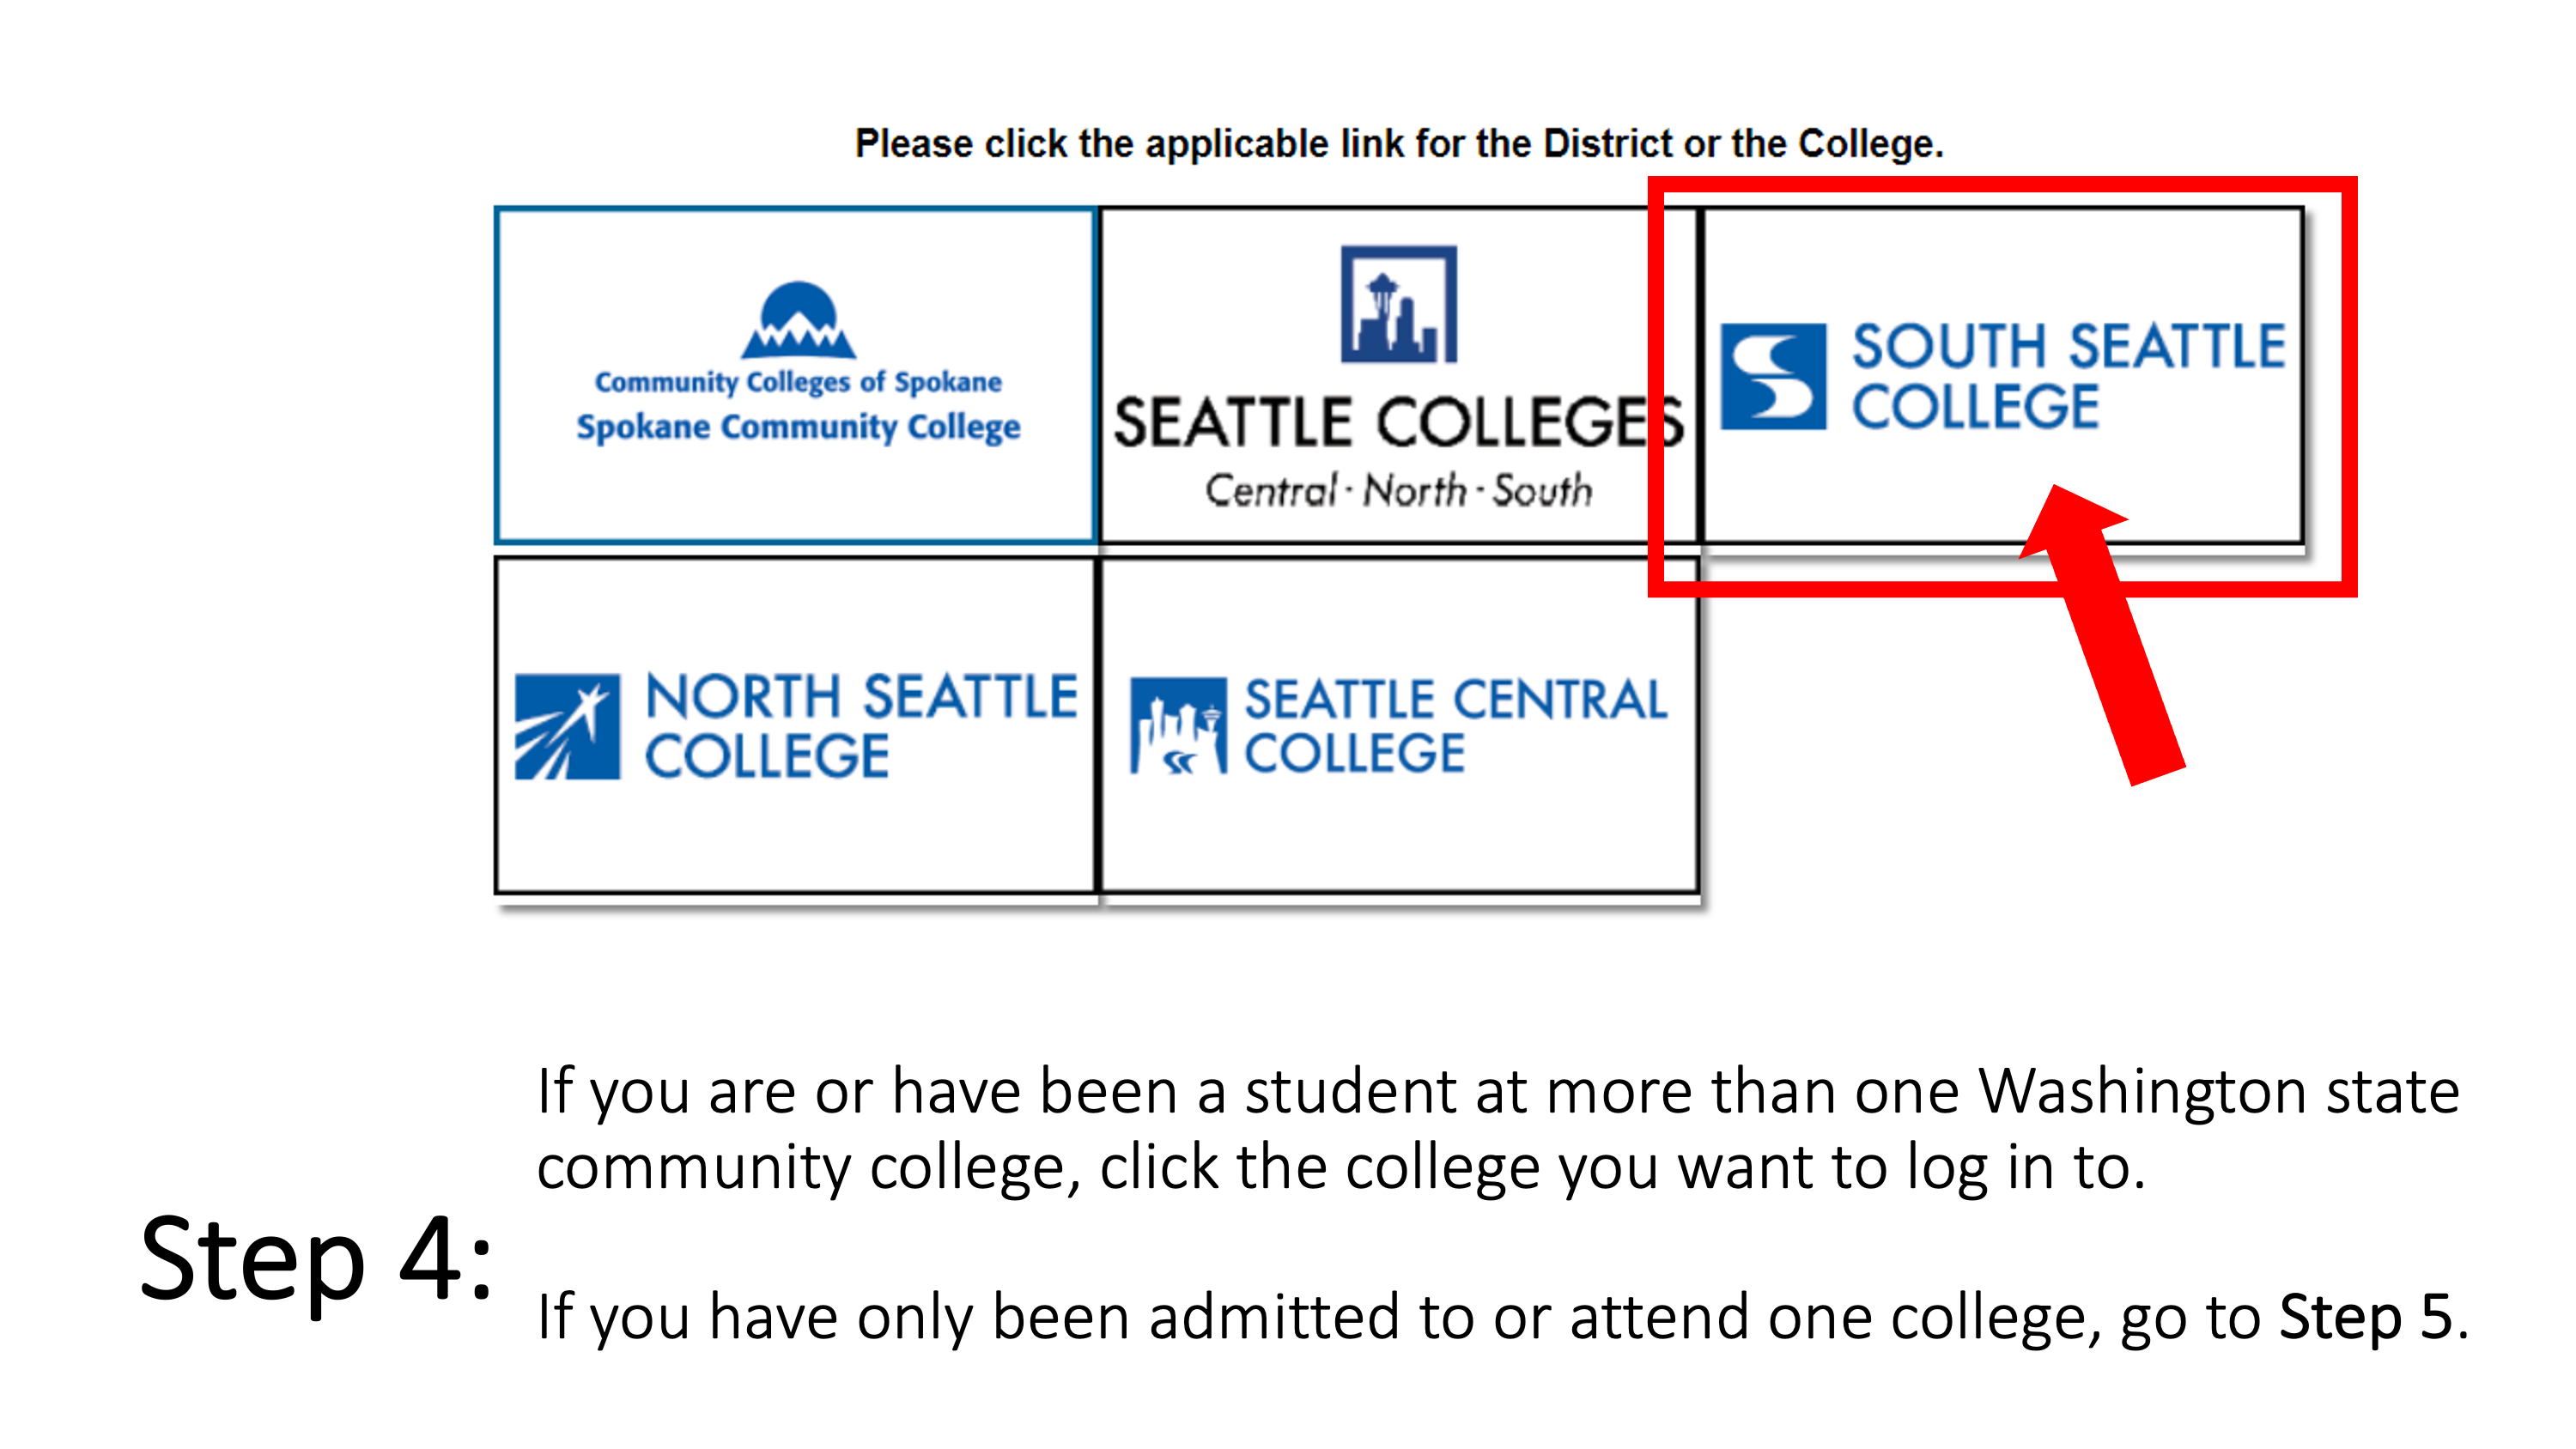 If you are or have been a student at more than one Washington state community college, click the college you want to log in to.